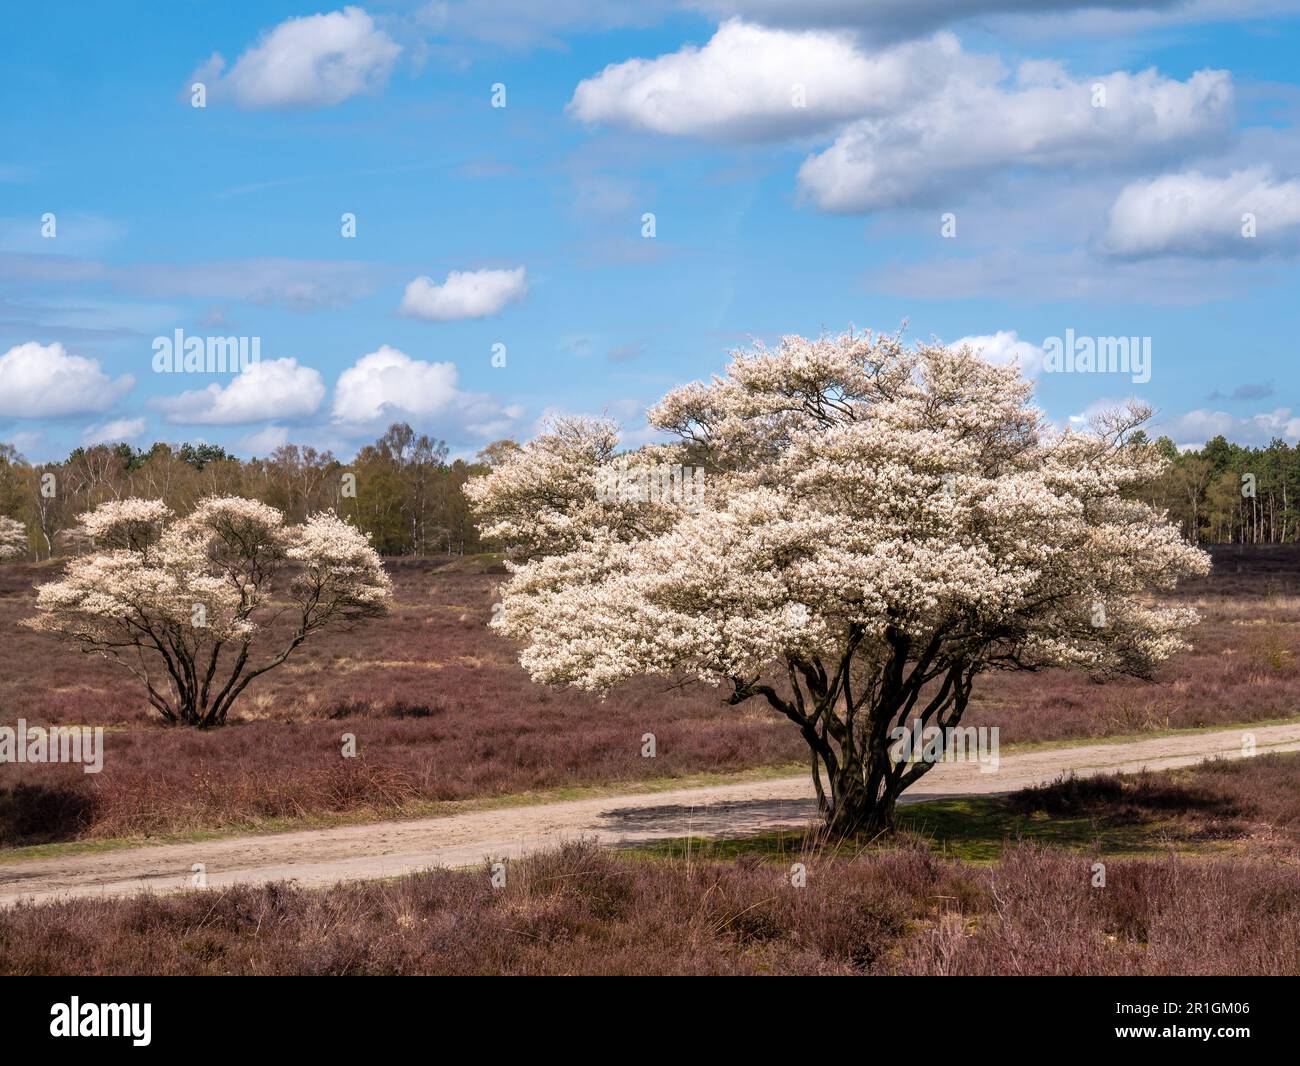 Flowering juneberry or snowy mespilus trees, Amelanchier lamarkii, and sand path in nature reserve Zuiderheide, Het Gooi, North Holland, Netherlands Stock Photo